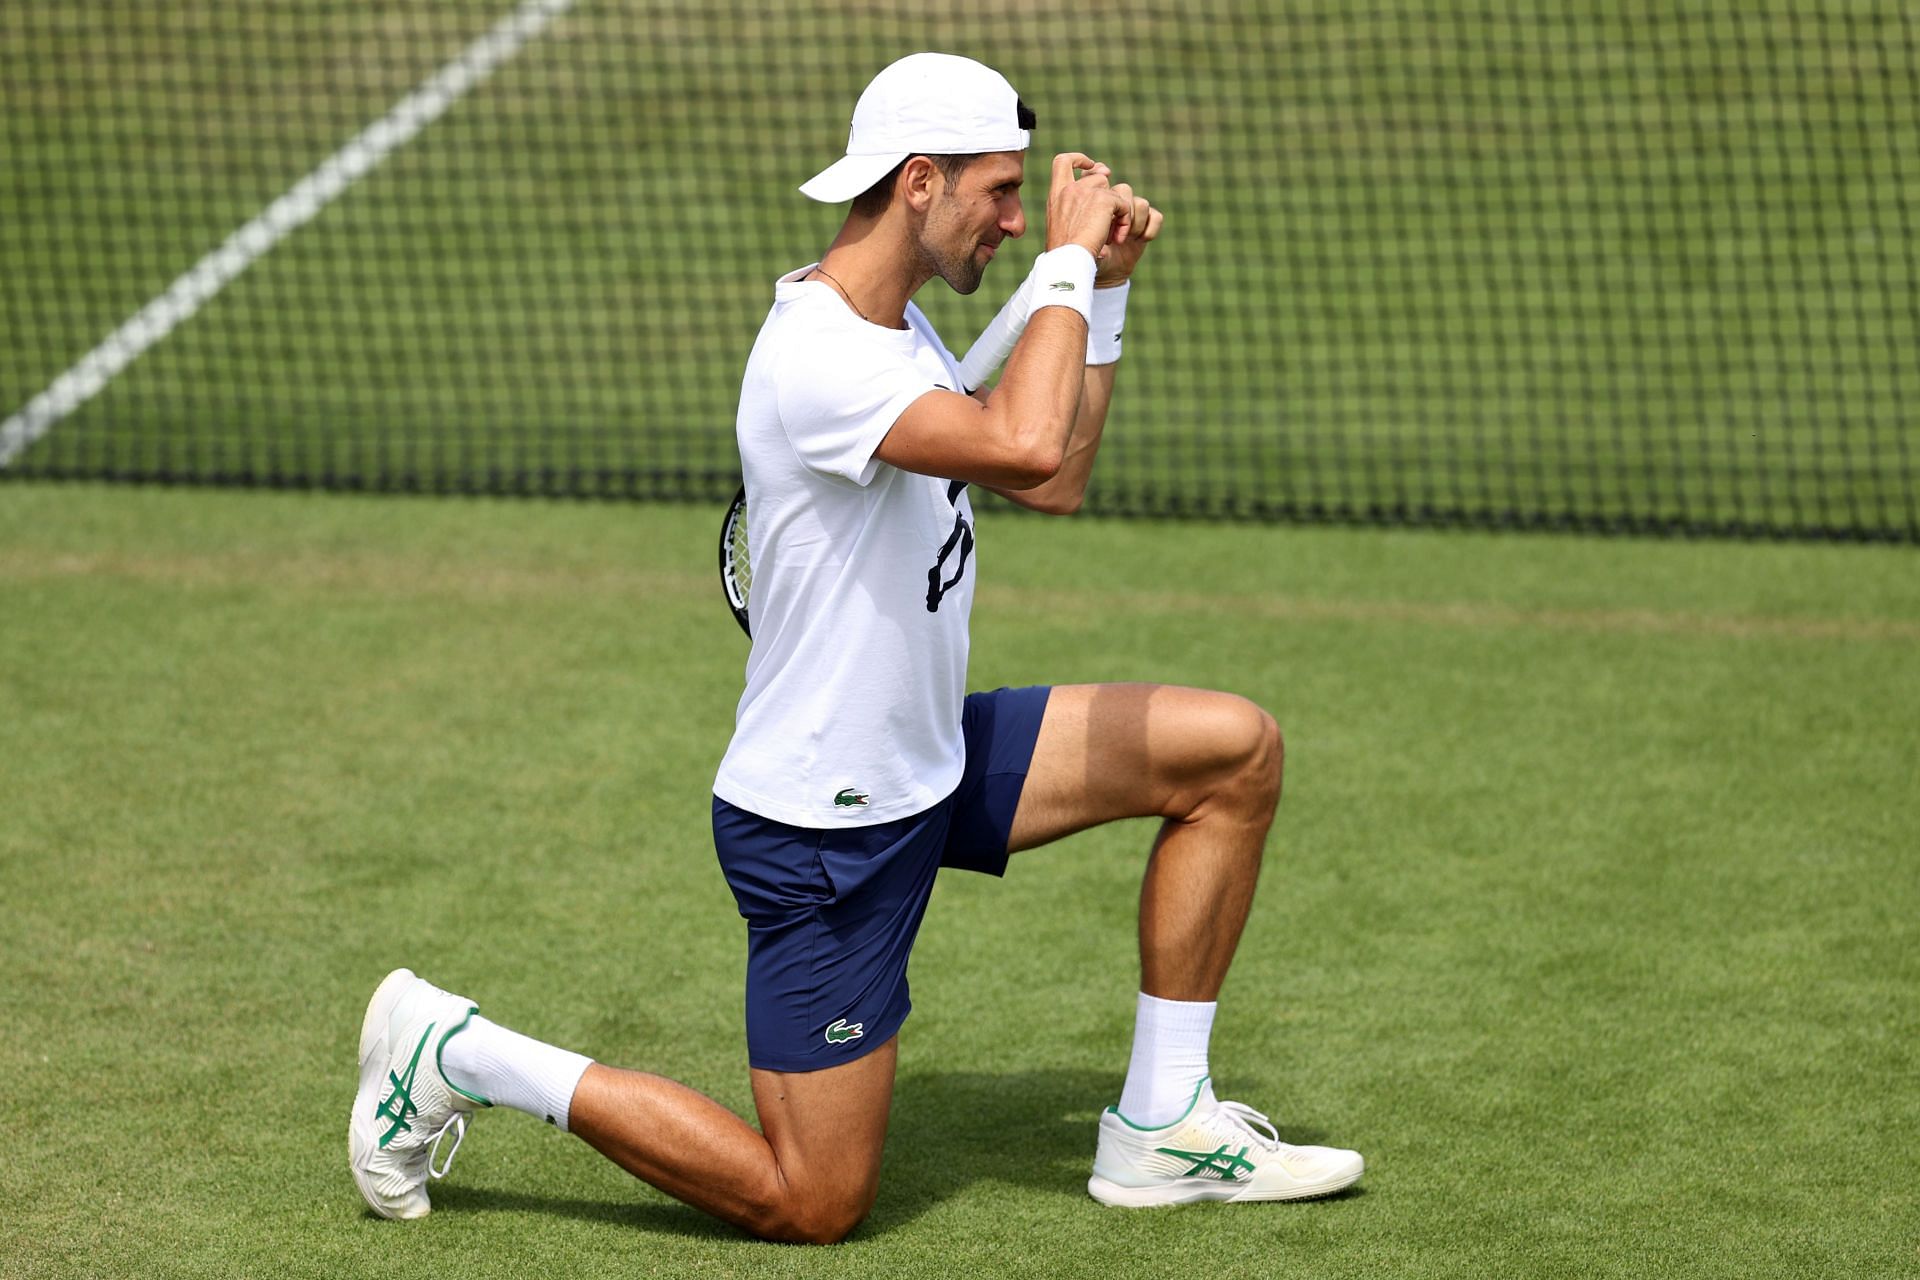 Novak Djokovic gestures during a practice session ahead of his quarterfinal match at the 2022 Championships